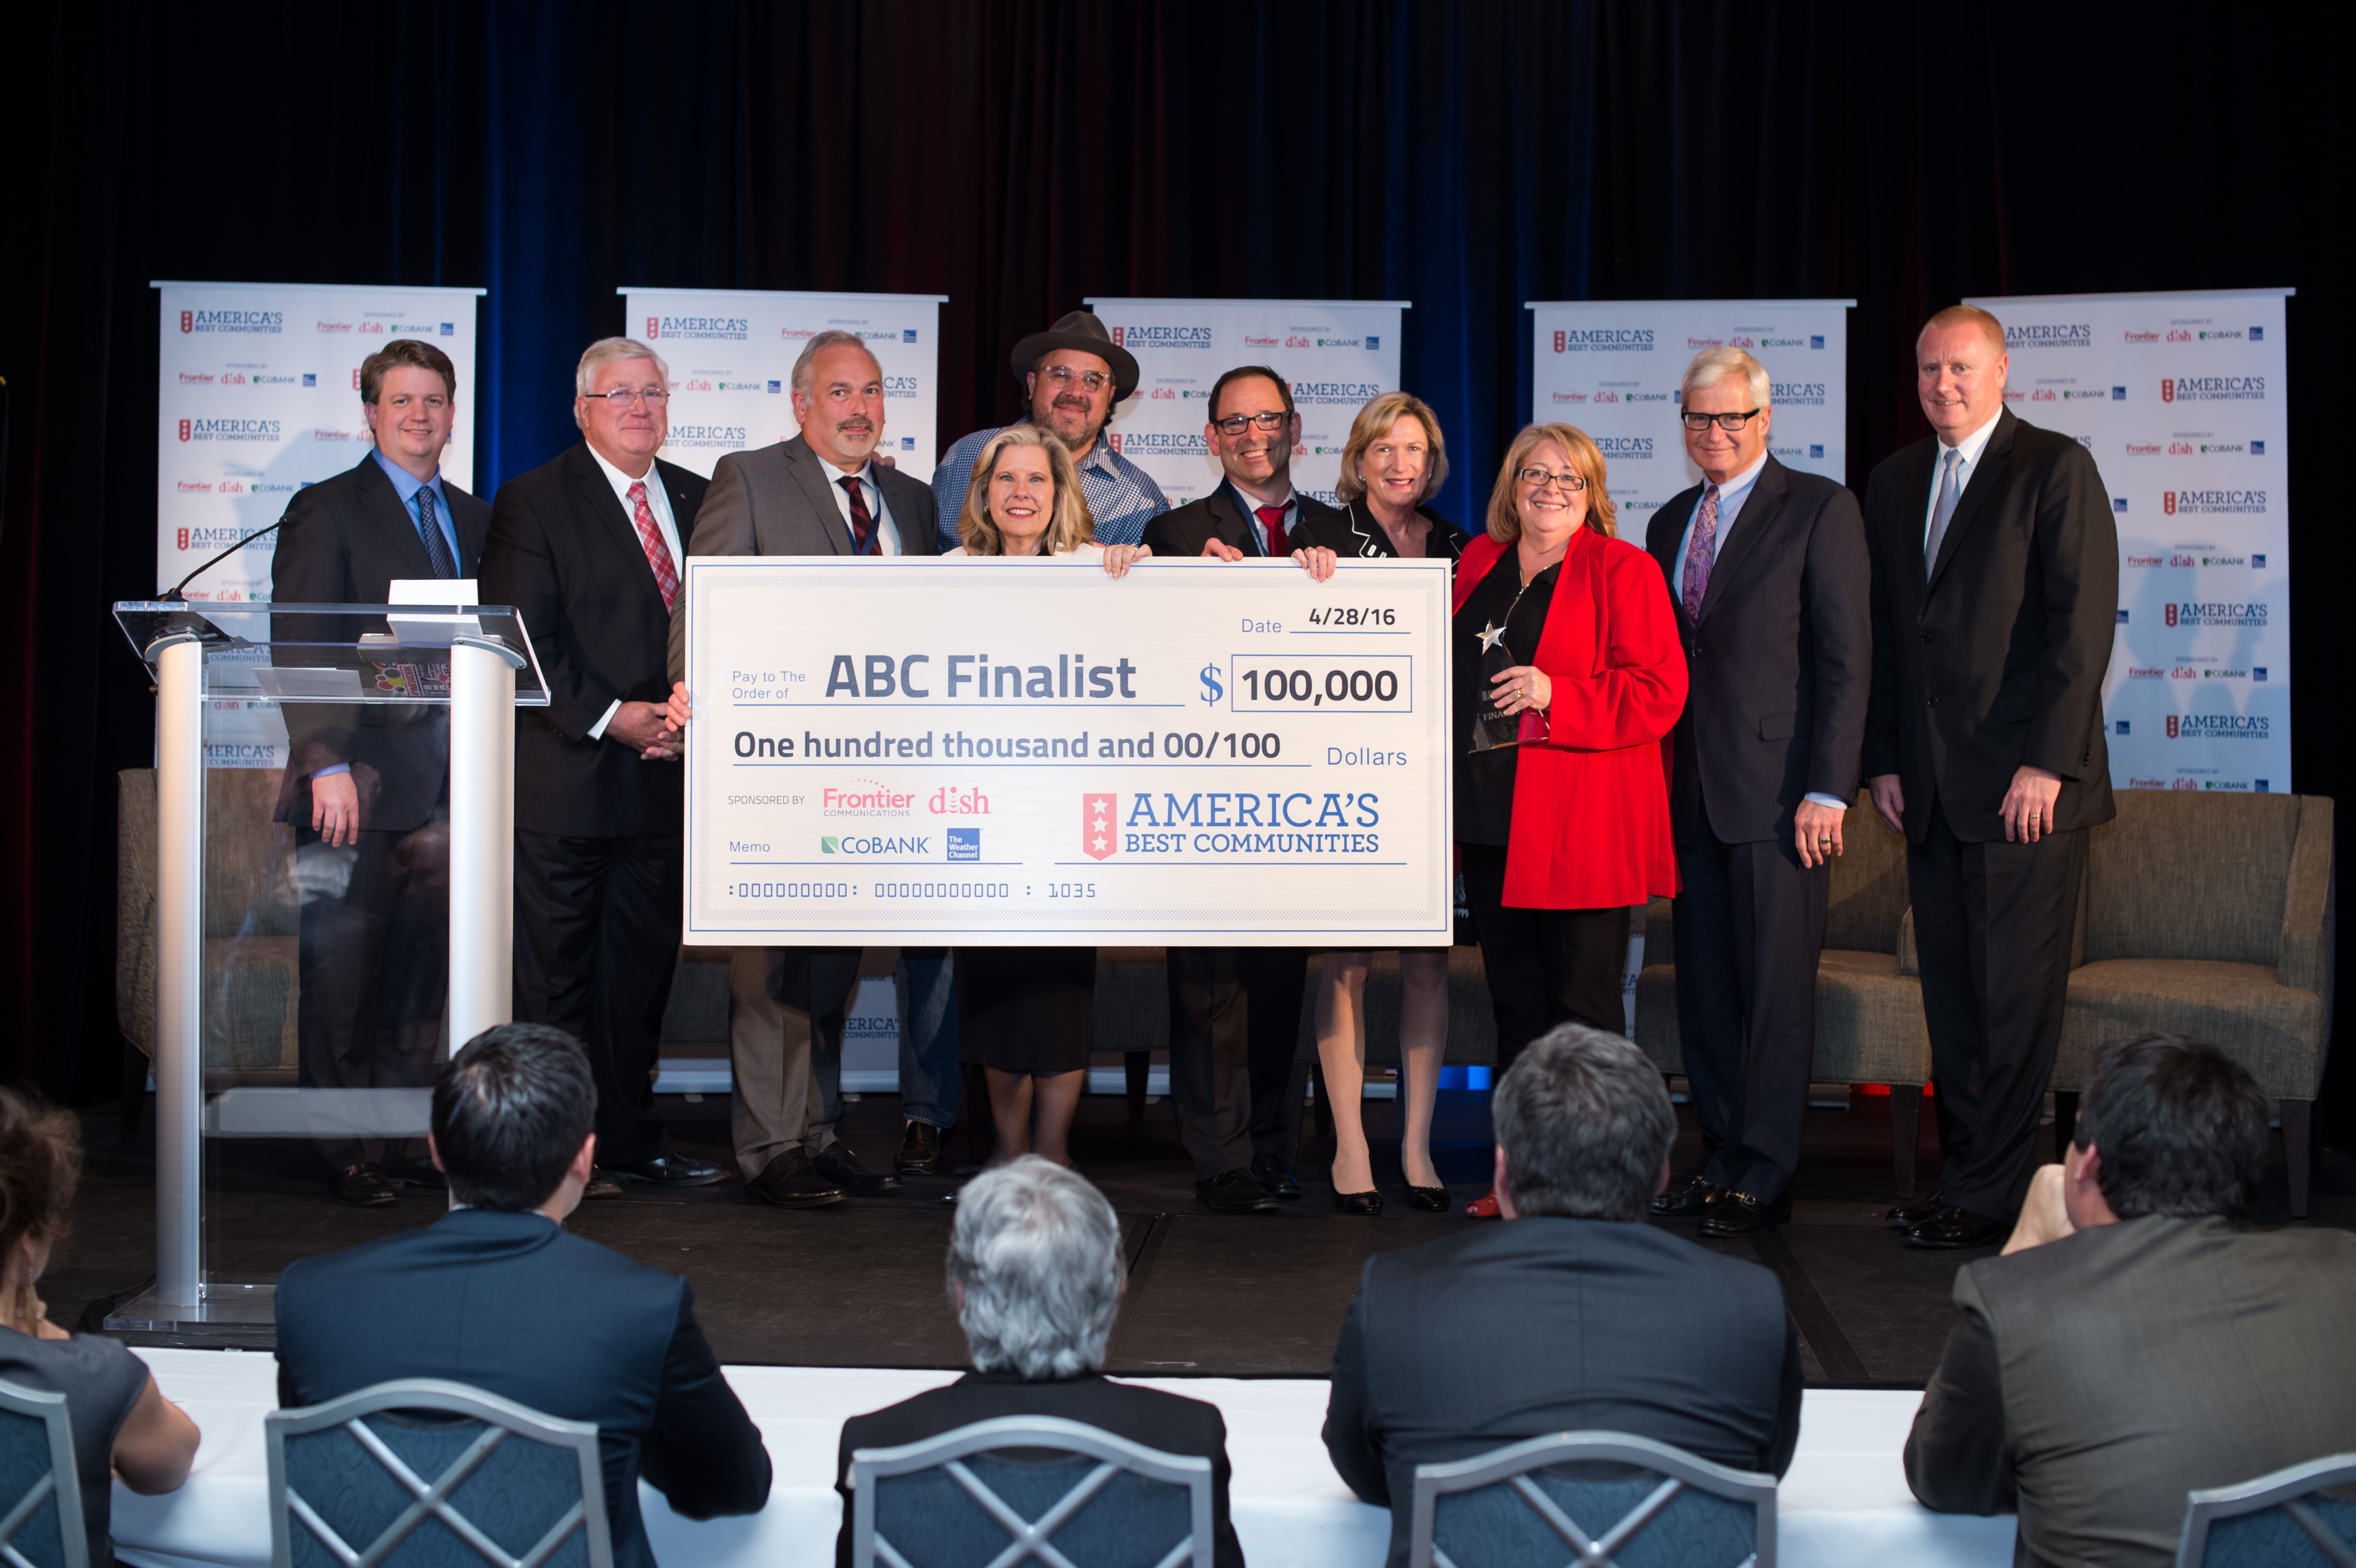 Group of people standing on stage holding an $100,000 check for the America's Best Communities competition